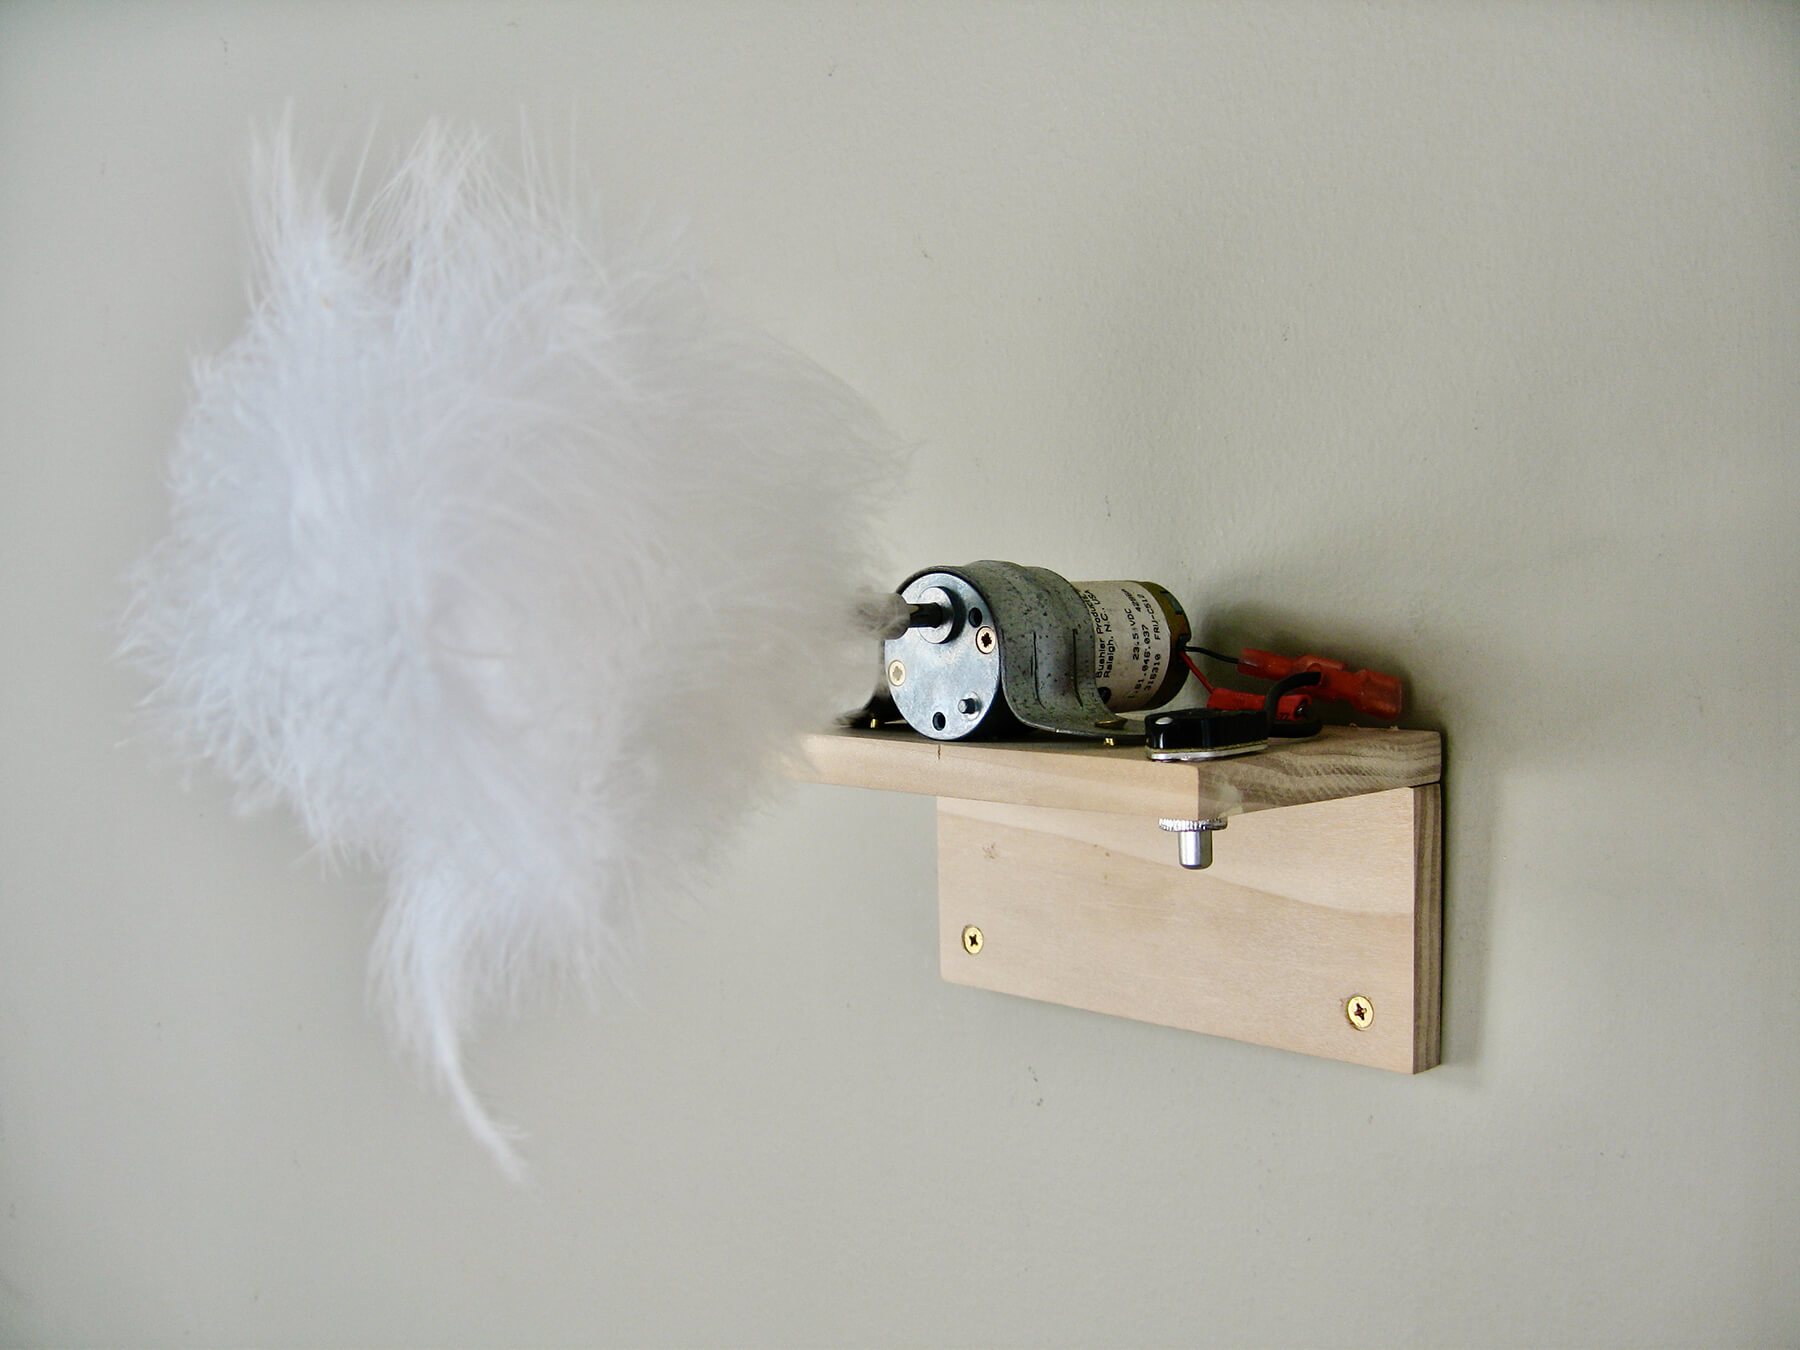 God as a Verb, Feathers, motor, on/off switch, hung at forehead height, 6 x 10 x 5 in, 2005